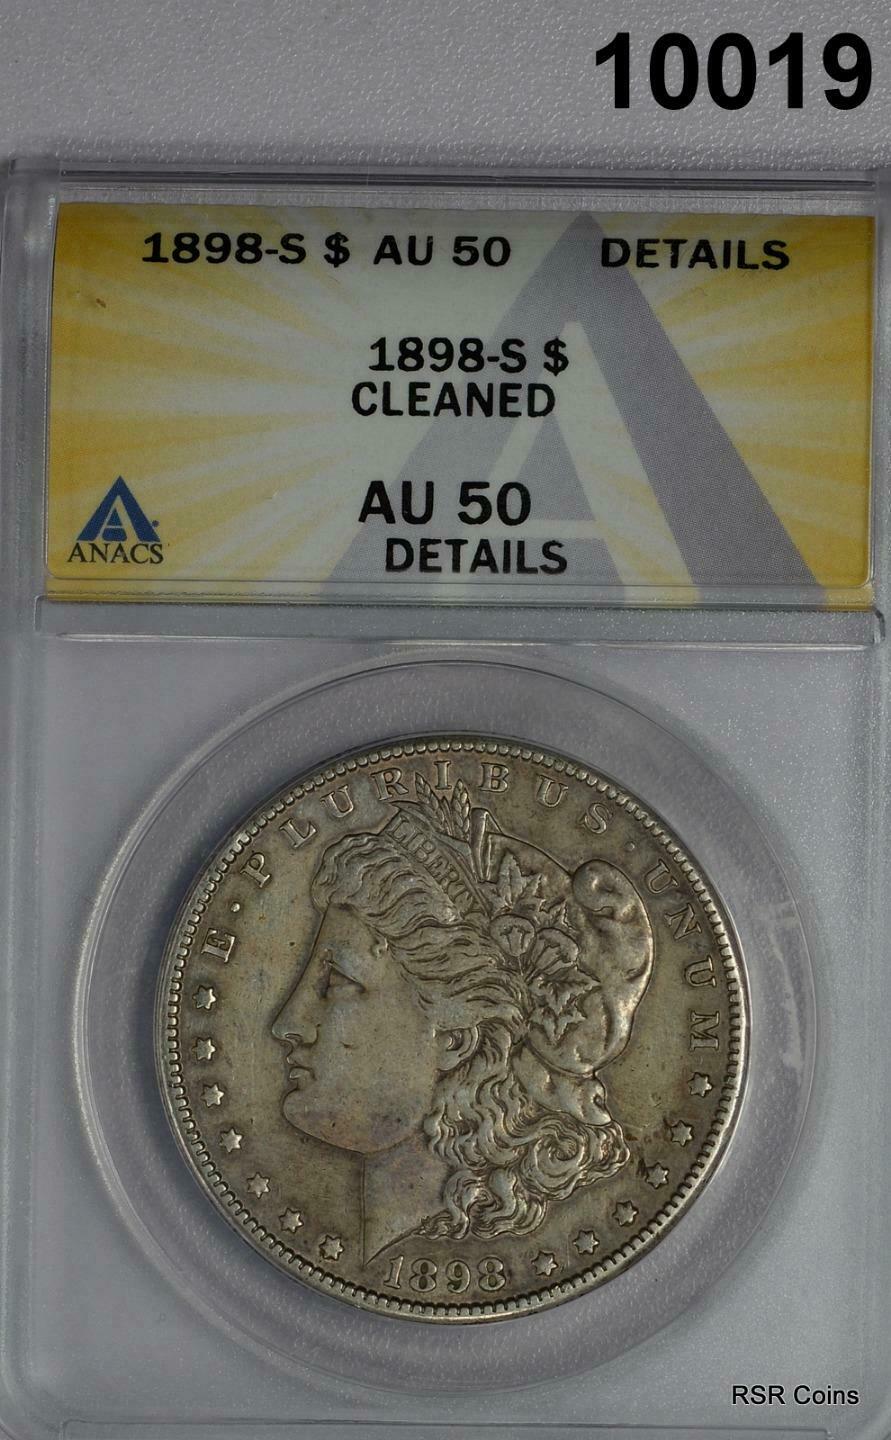 1898 S MORGAN SILVER DOLLAR ANACS CERTIFIED AU50 CLEANED#10019